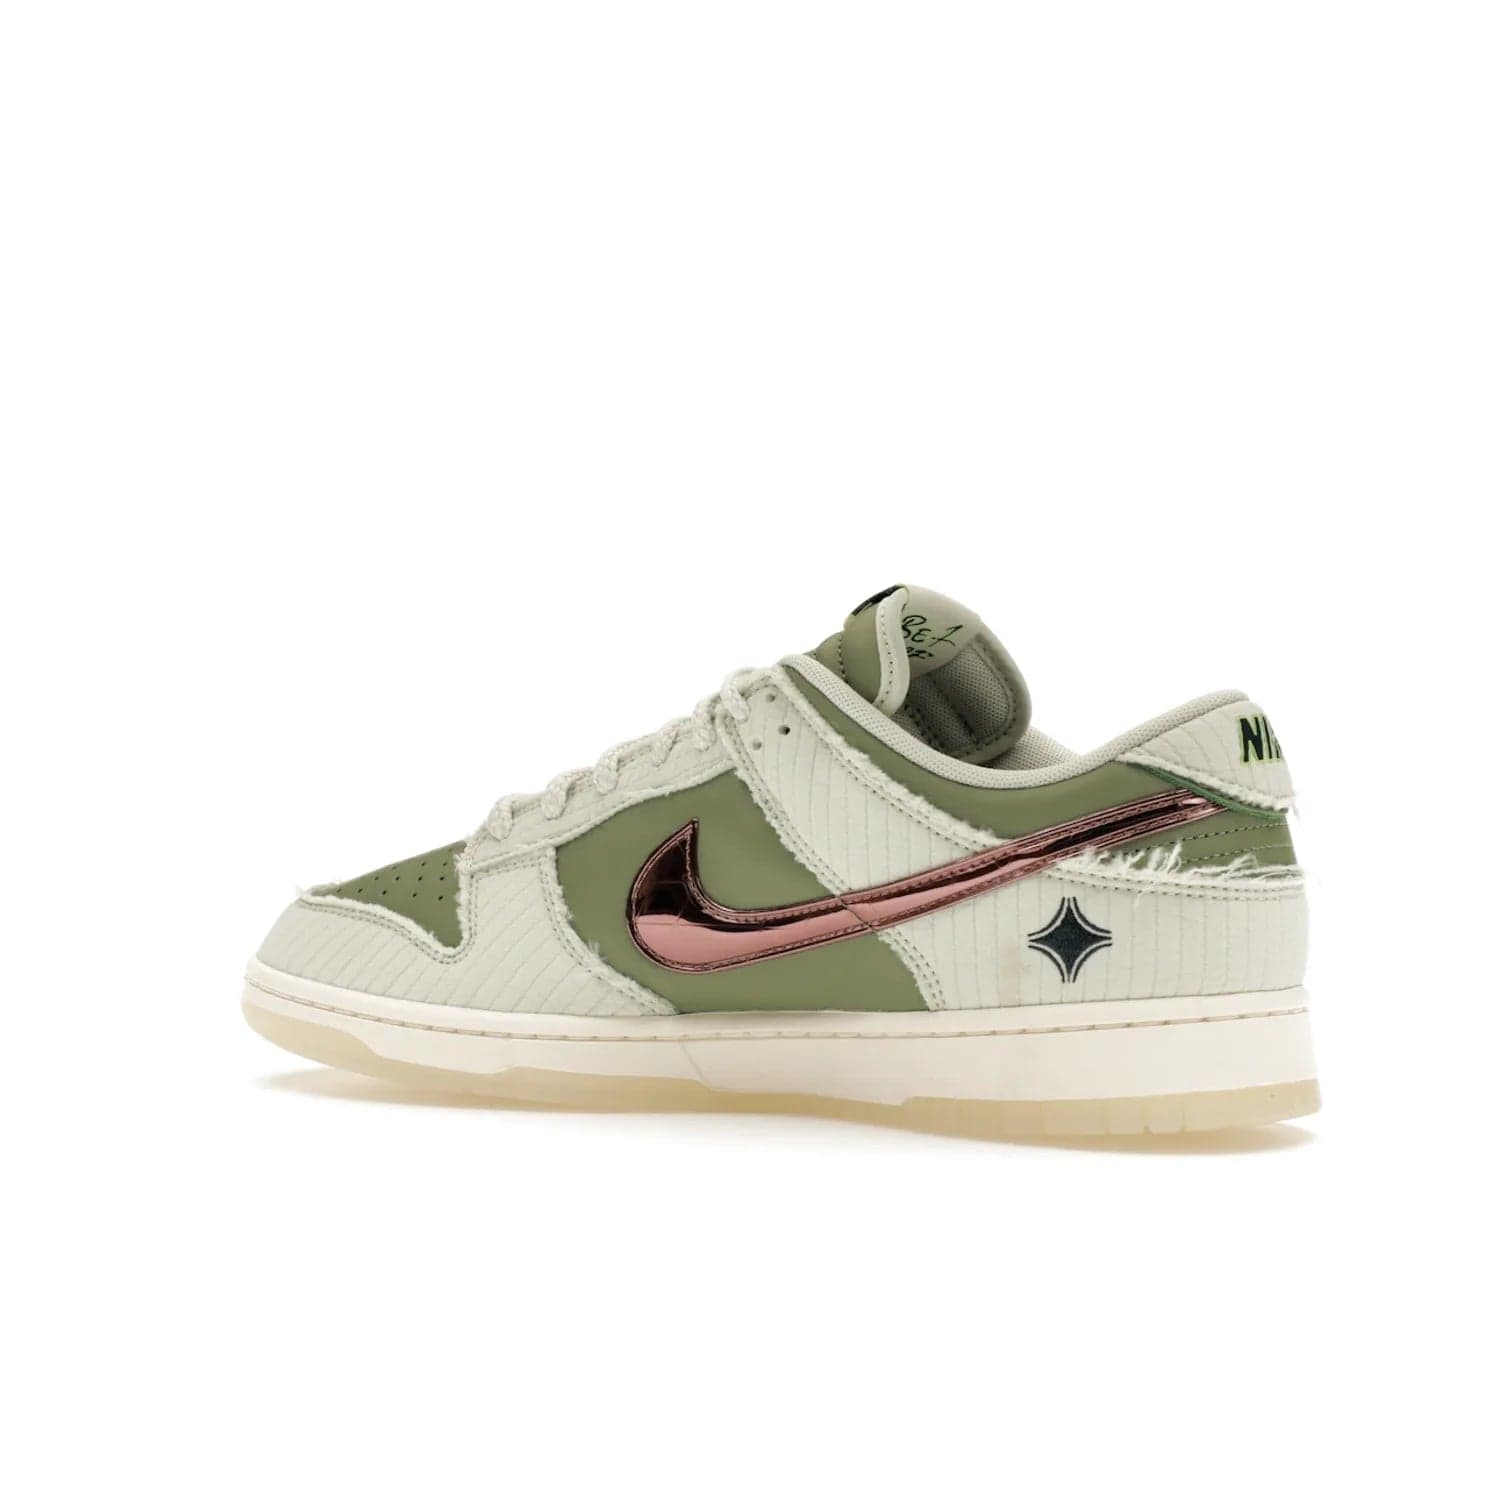 Nike Dunk Low Retro PRM Kyler Murray Be 1 of One - Image 22 - Only at www.BallersClubKickz.com - Introducing the Nike Dunk Low Retro PRM Kyler Murray "Be 1 of One"! A Sea Glass upper with Sail and Oil Green accents, finished with Rose Gold accents. Drop date: November 10th.